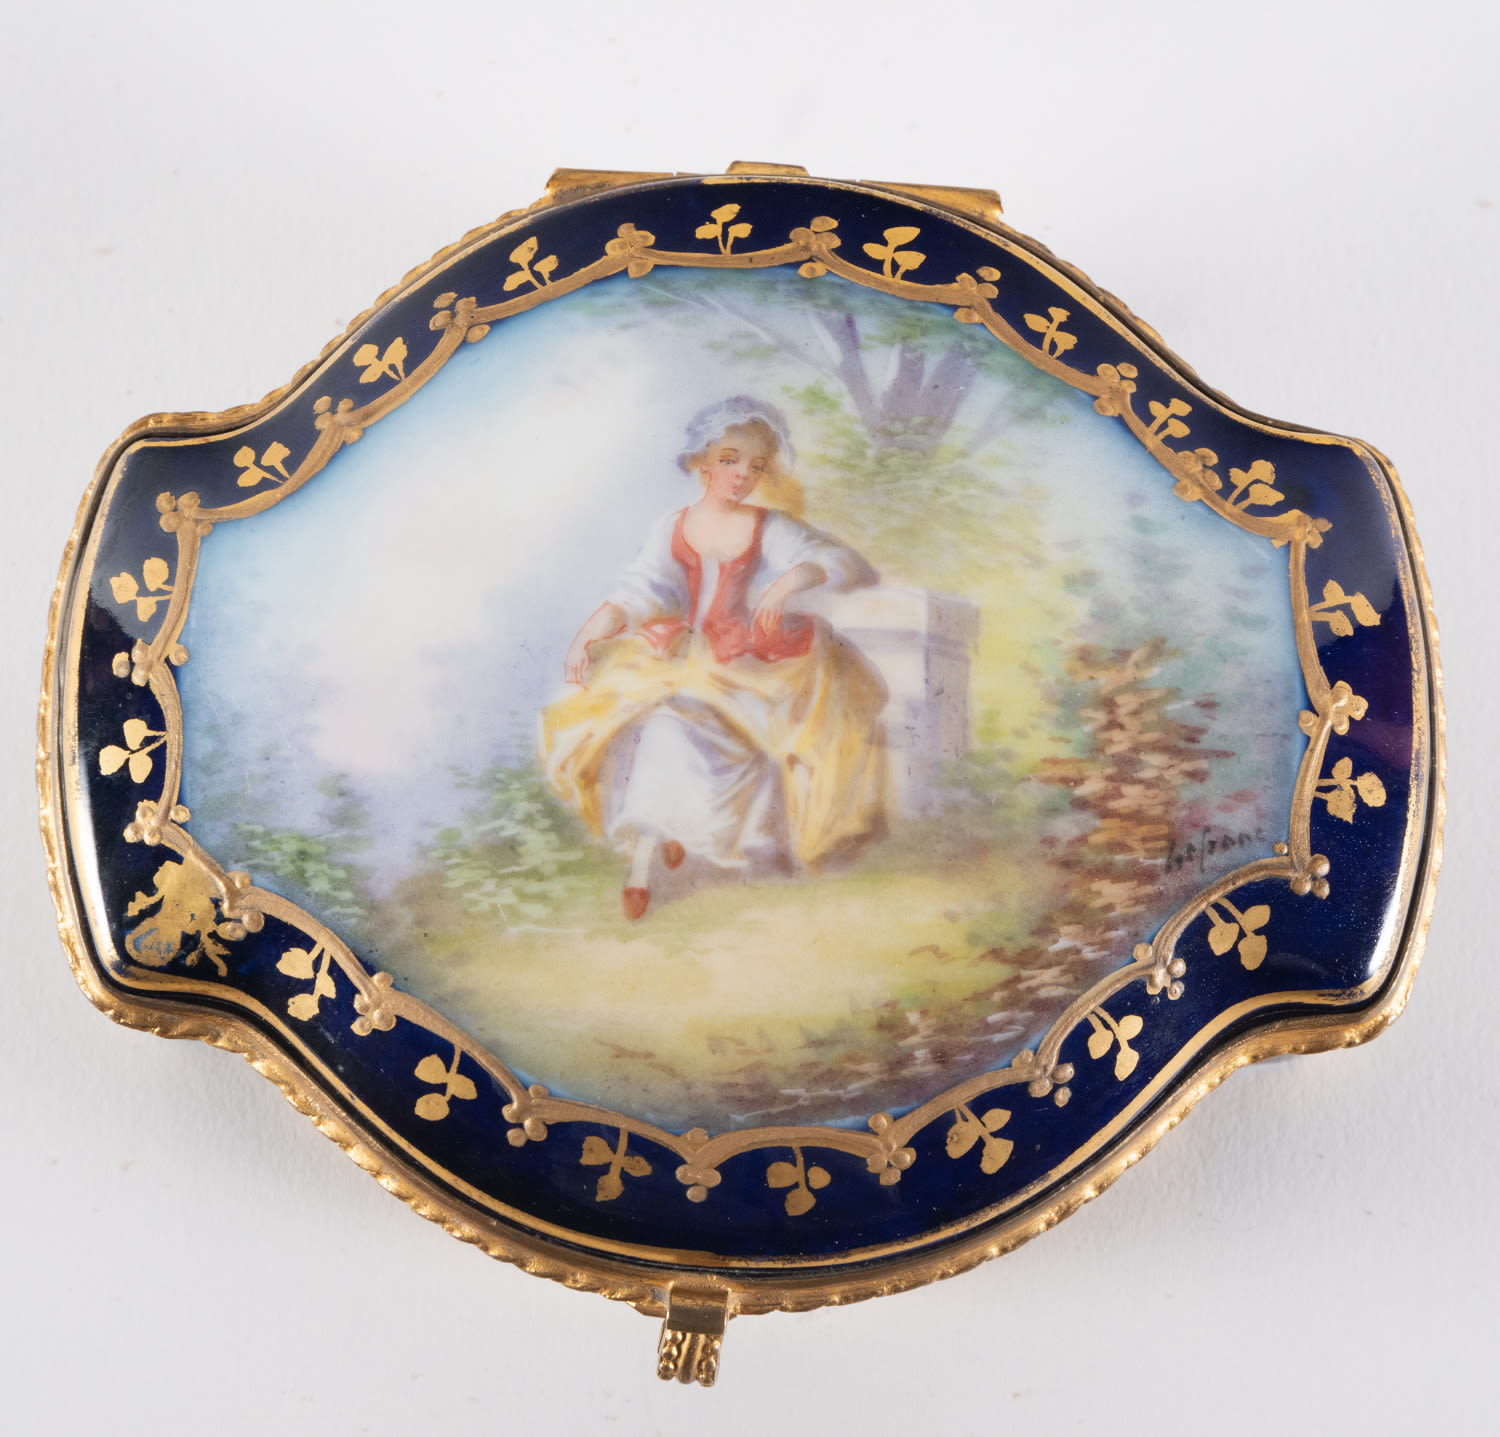 Enamelled Sèvres porcelain jewelry box, 19th century, Tuileries series - Image 2 of 5